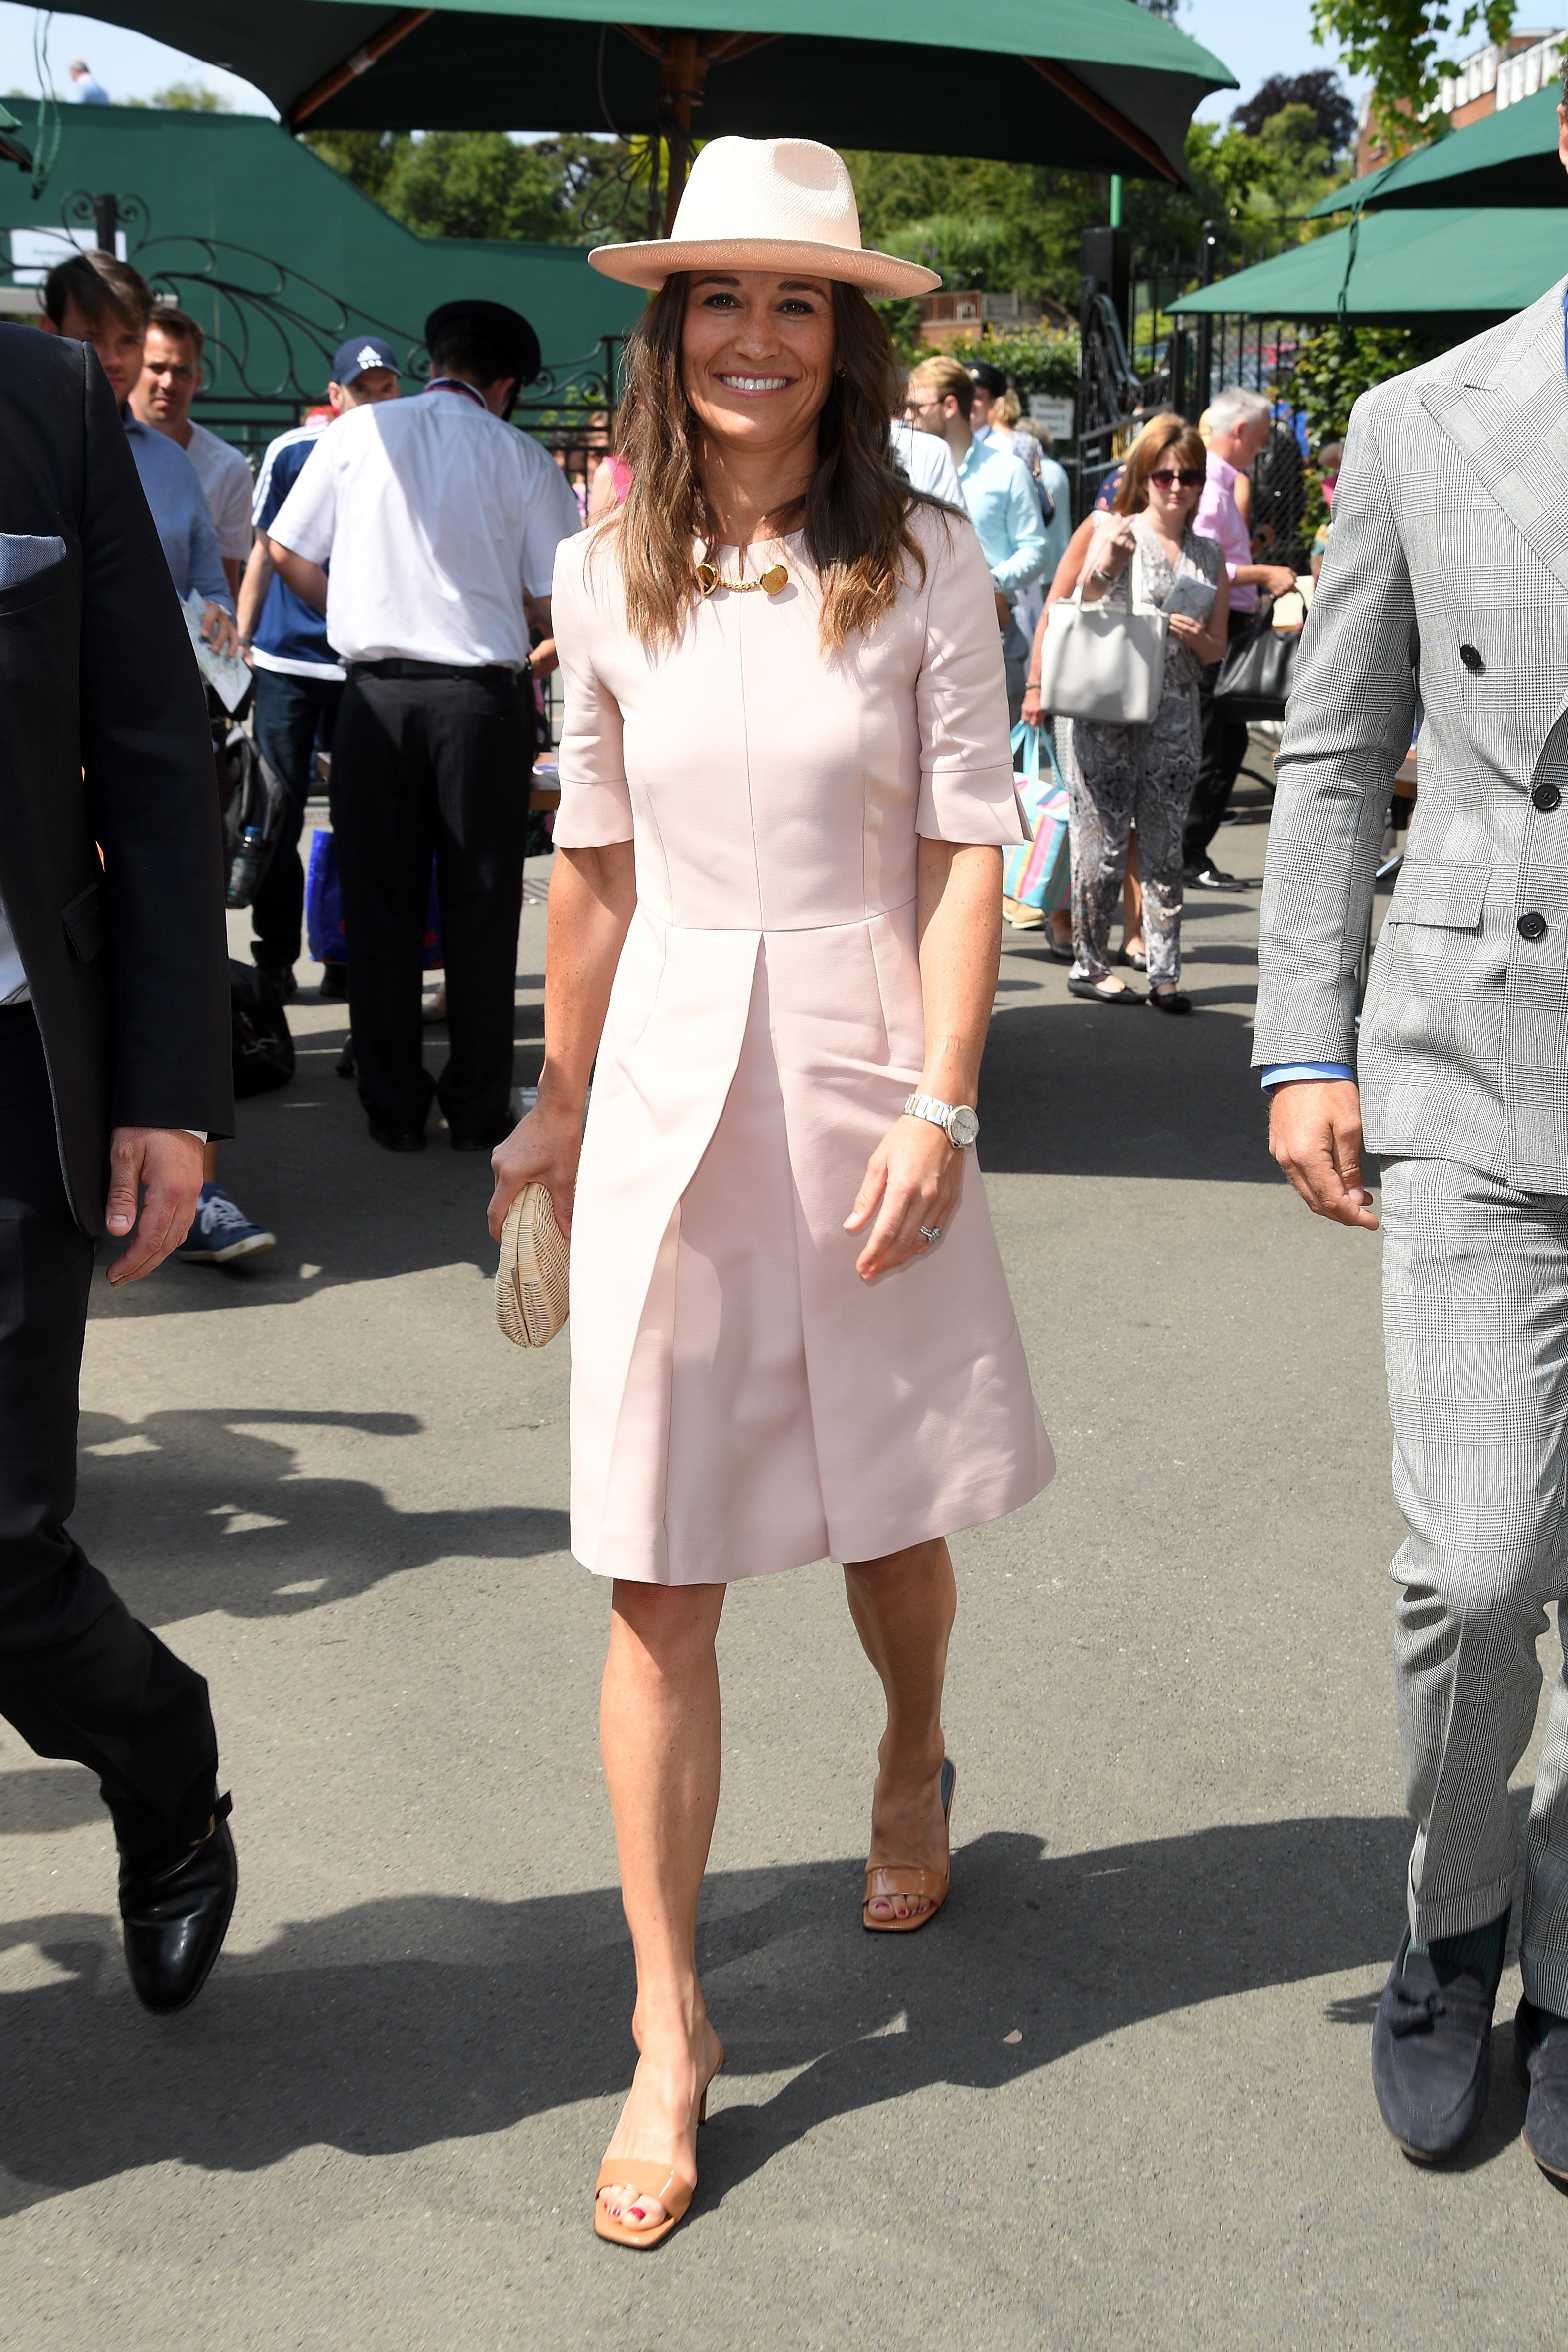 Pippa Middleton at Wimbledon games. | Source: Getty Images